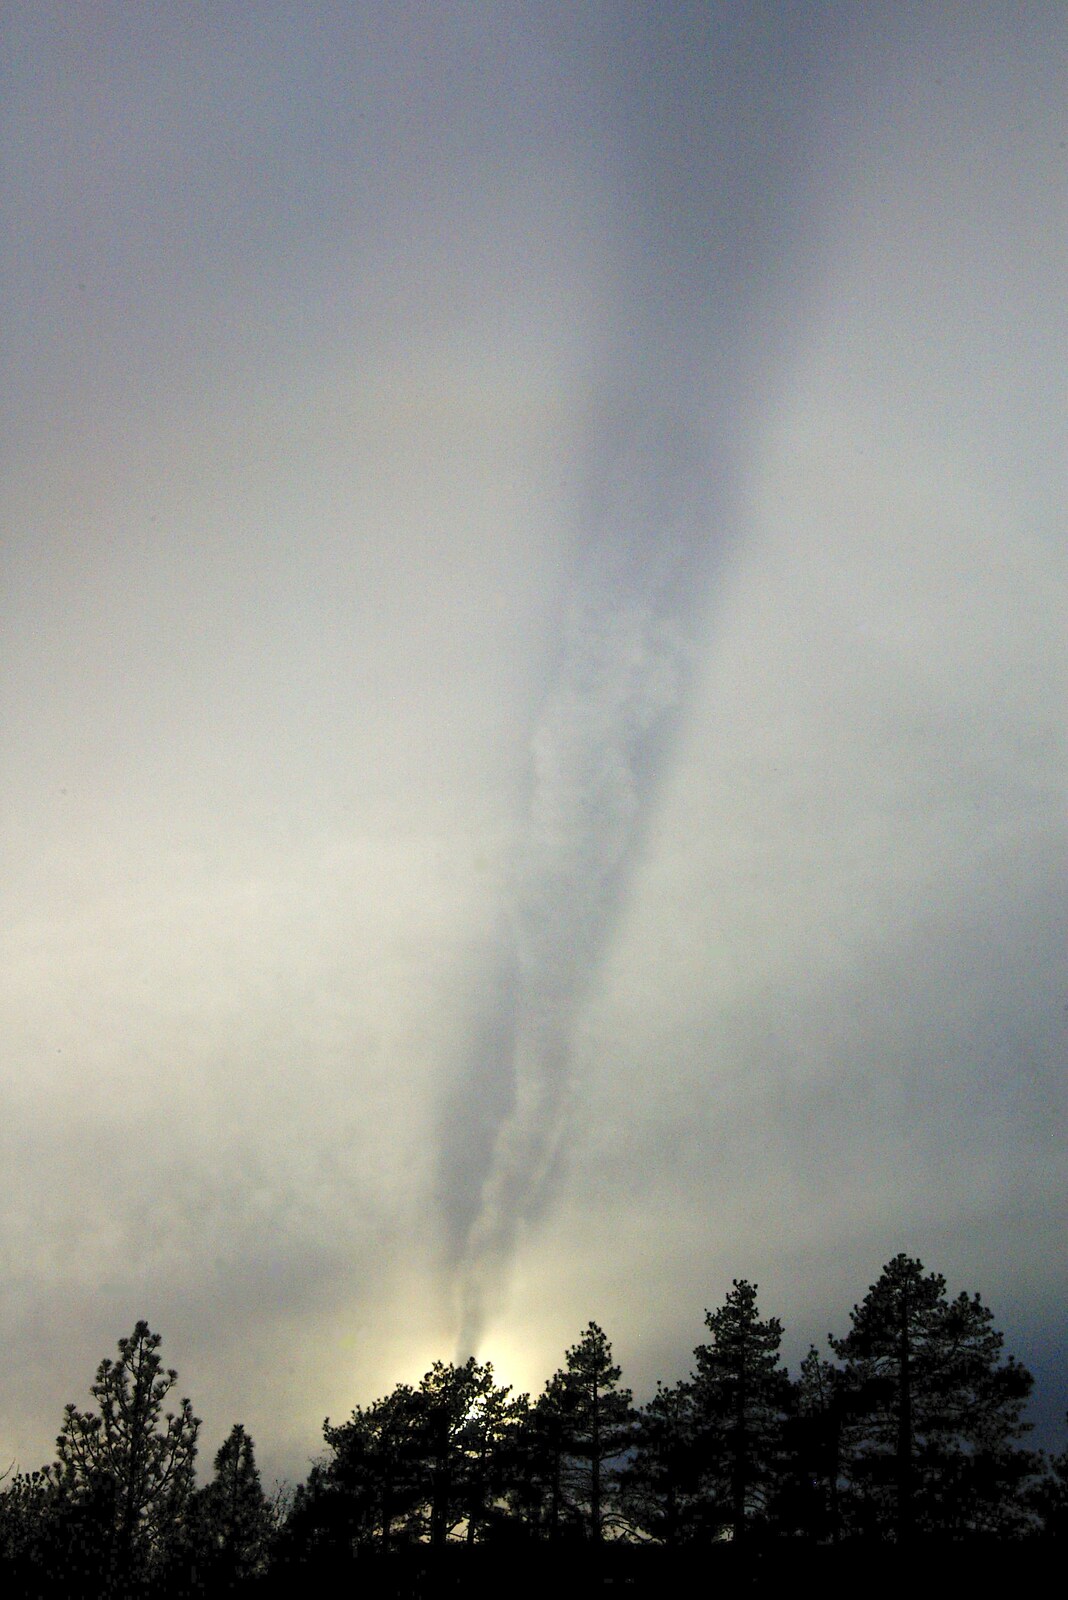 The shadow of a contrail on high cloud from California Snow: San Bernadino State Forest, California, US - 26th March 2006